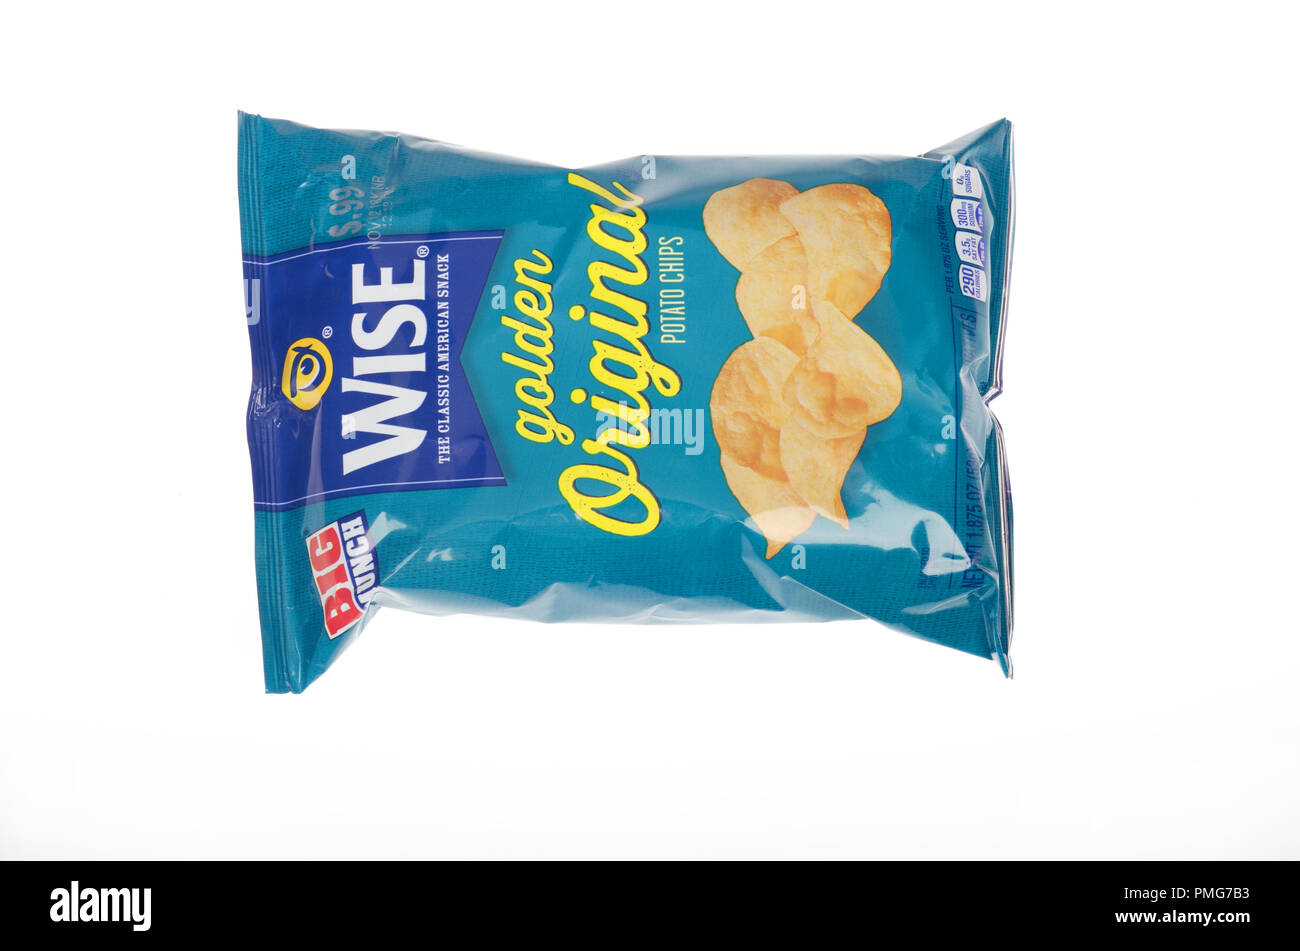 Bag or packet of Wise Golden Original potato chips or crisps on white background Stock Photo